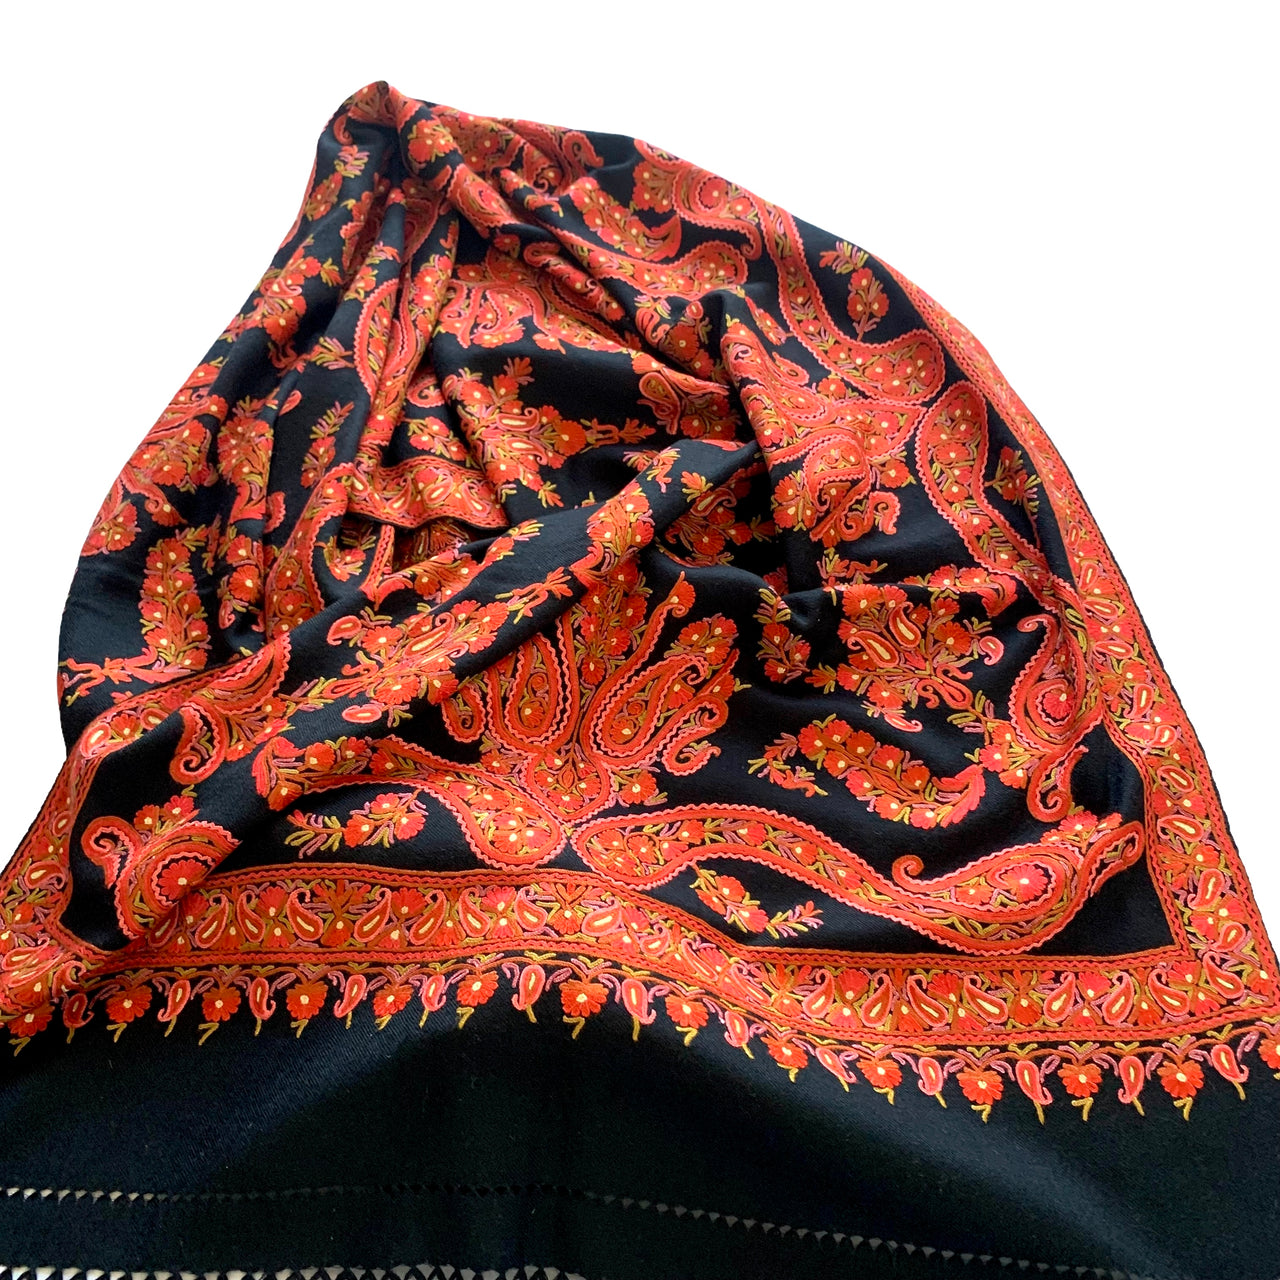 Black Paisley Floral Gorgeous Embroidered Floral Shawl Stole Scarf Shoulder Wrap